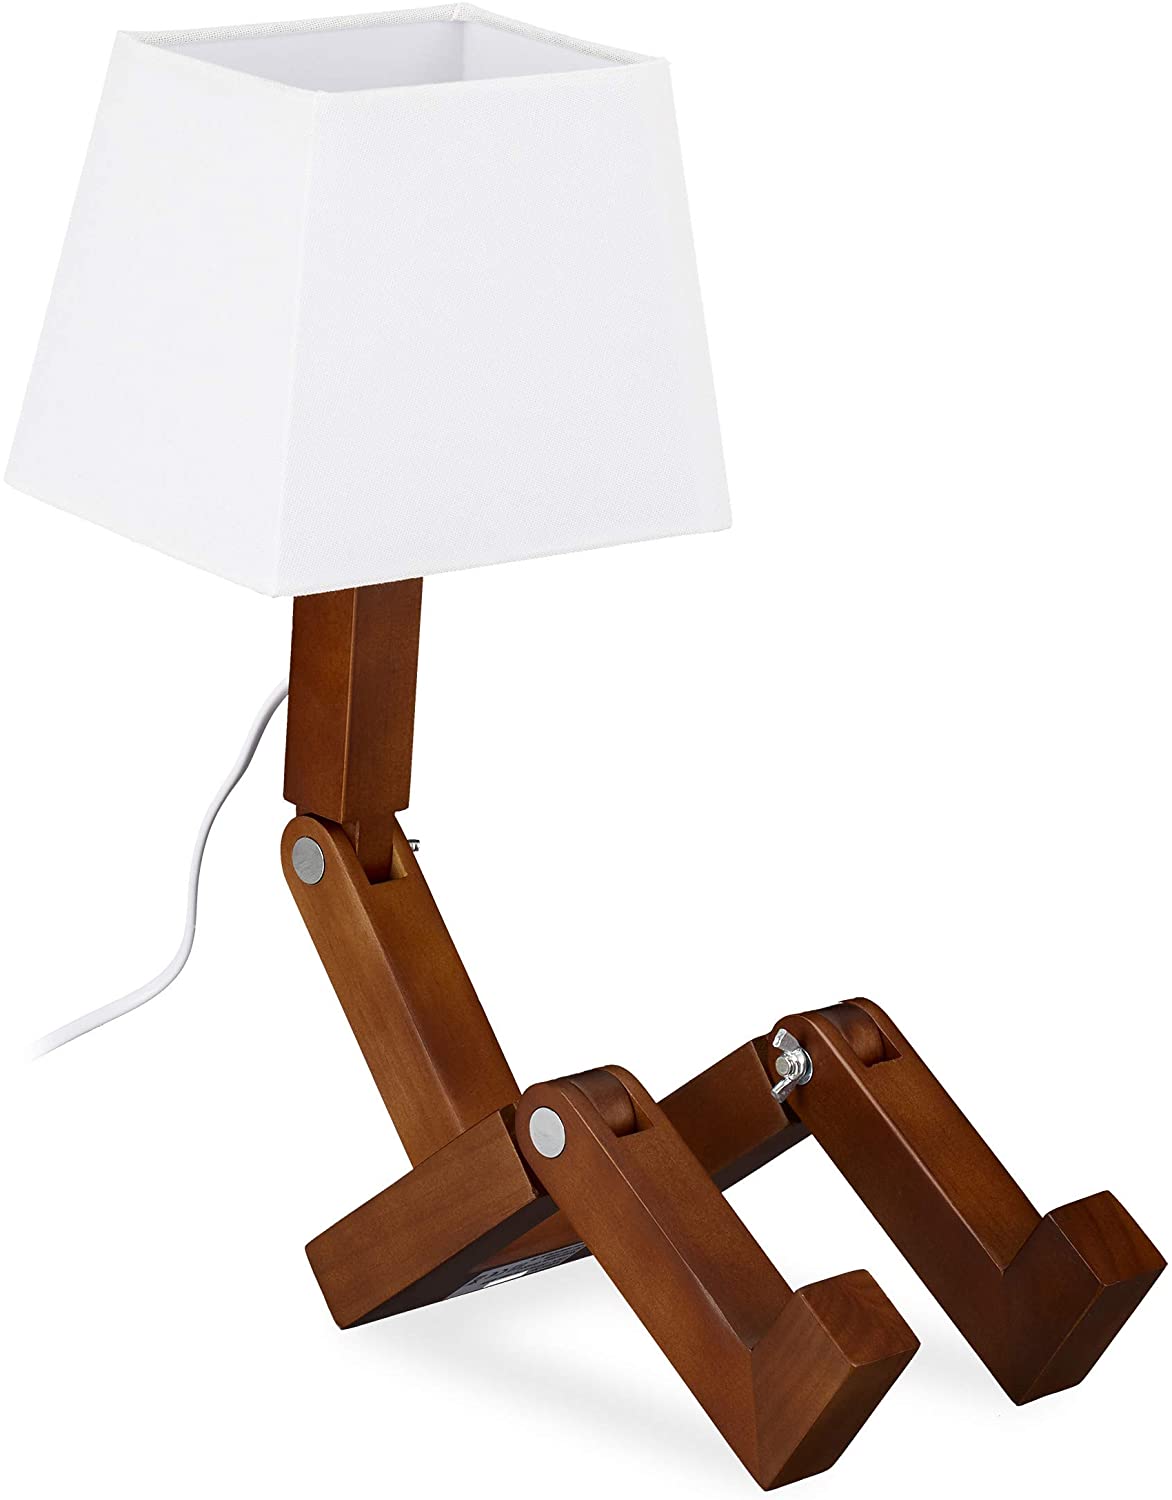 Relaxdays 10032216 Robot Table Lamp, Fabric Lampshade, Wood, Children\'s Lamp, 42 x 18 x 32 cm, Brown